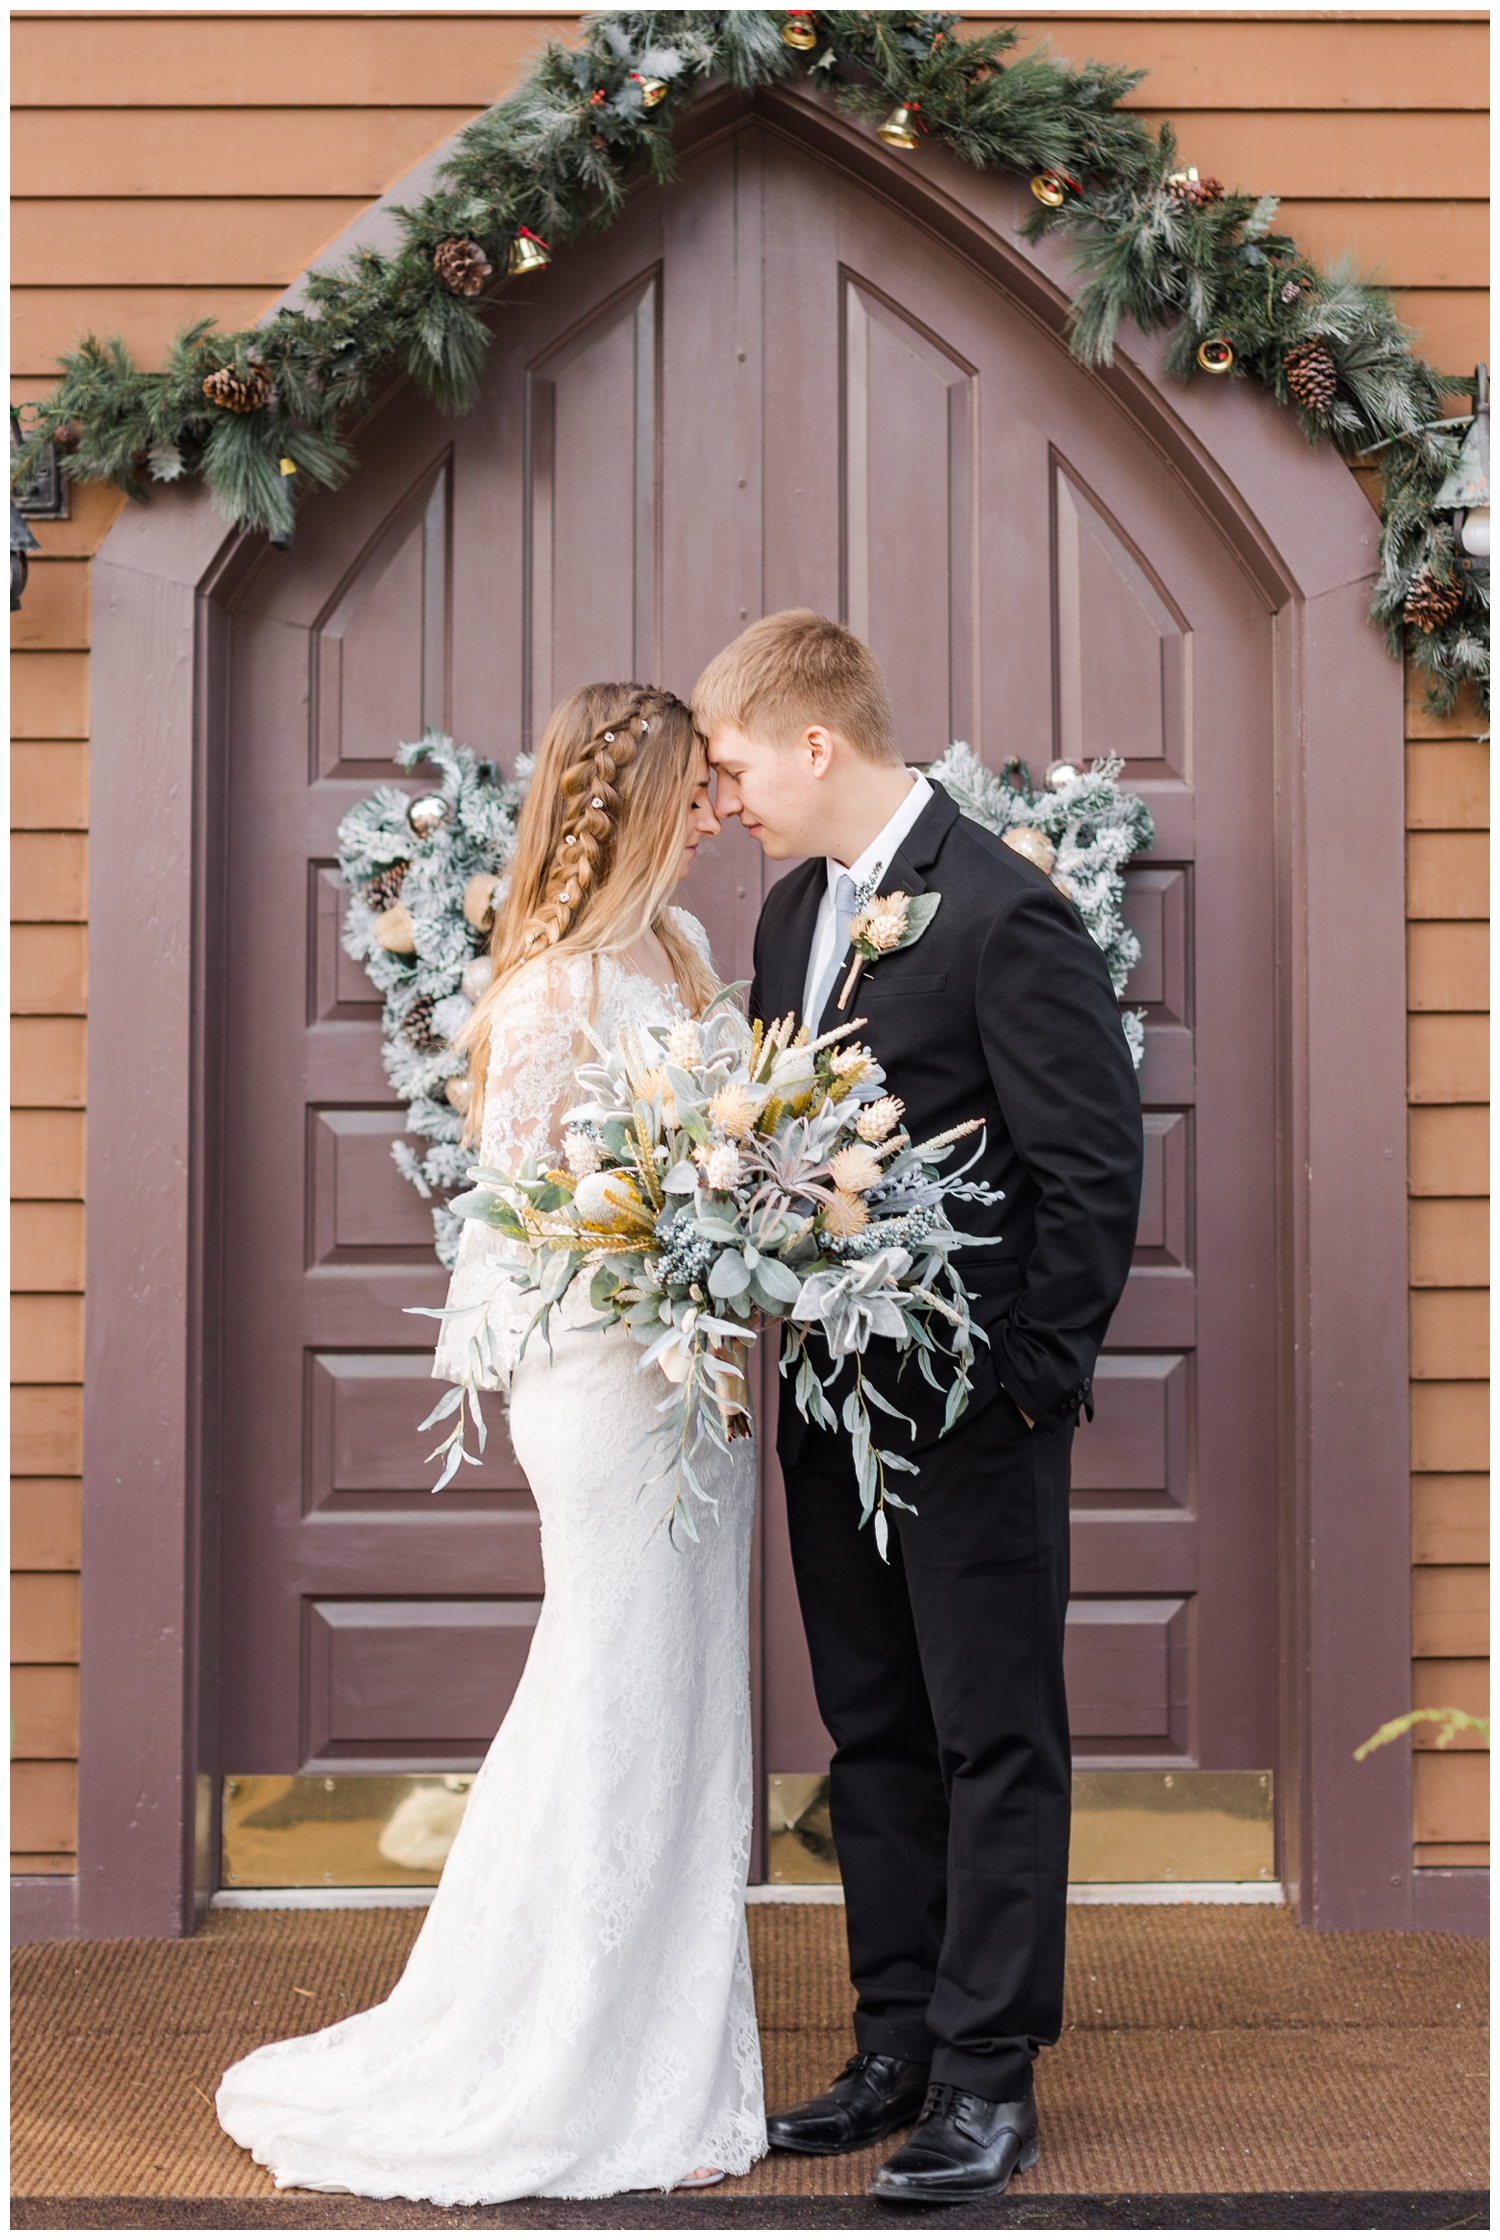 Bride and groom embrace in front of The Little Brown Church in the Vale in Nashua, IA | CB Studio